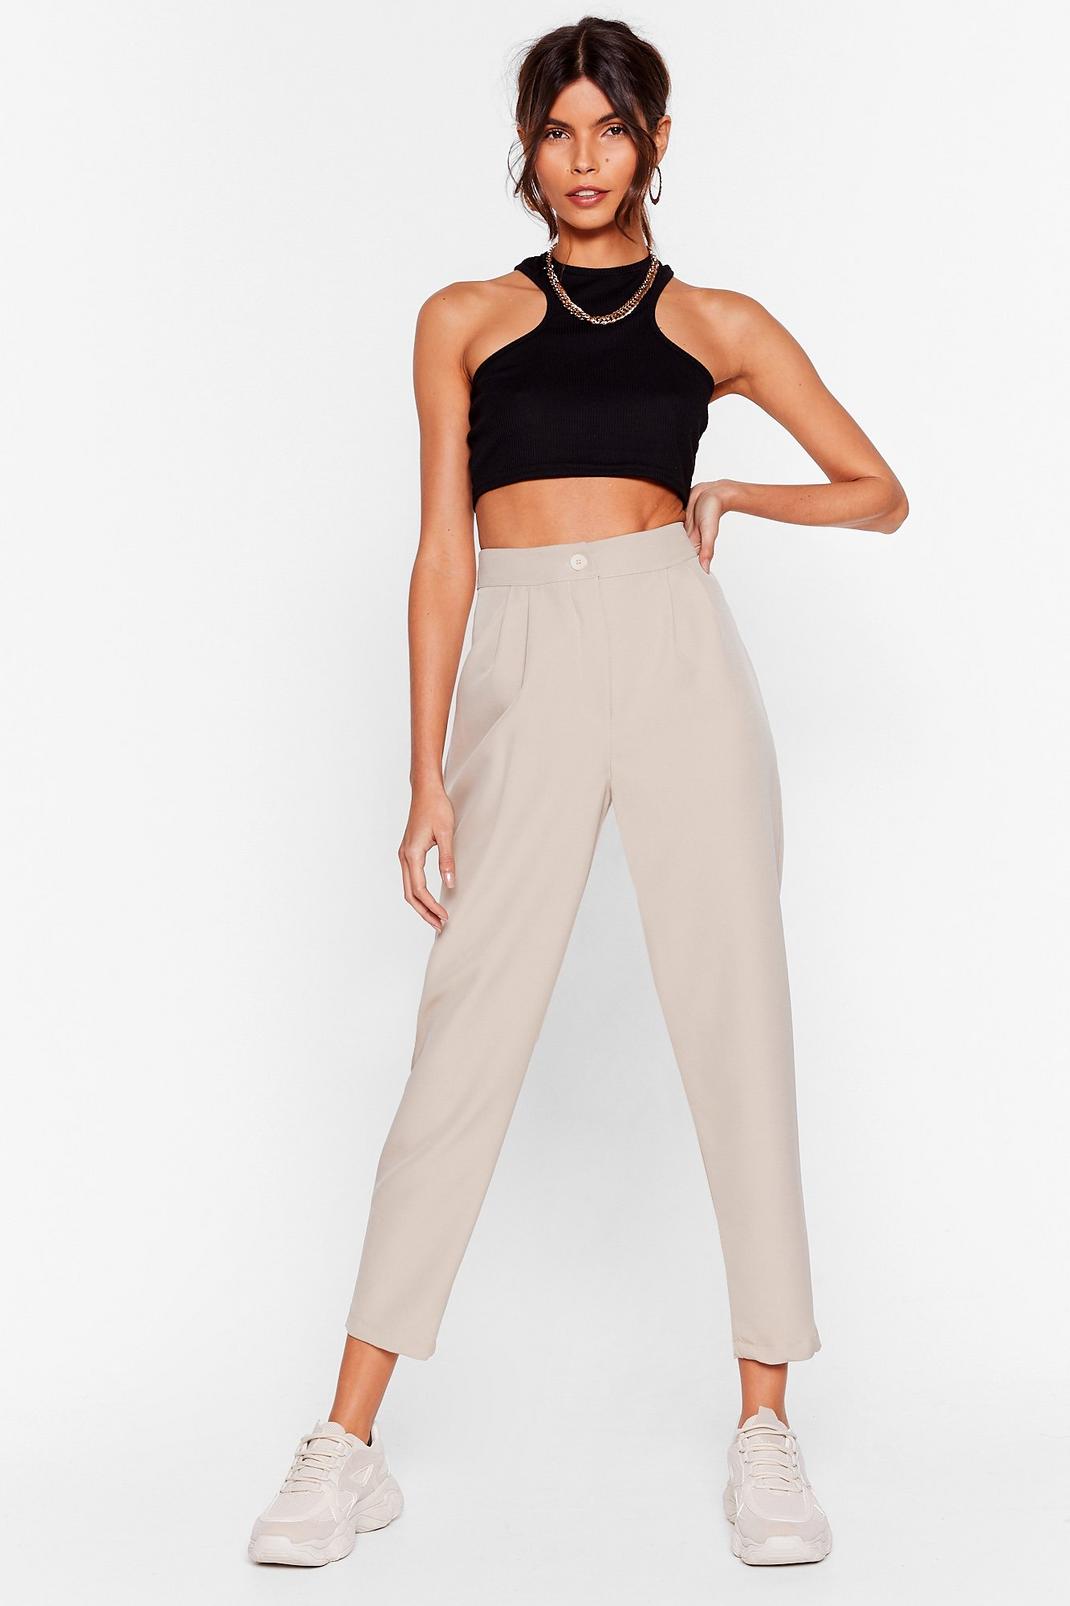 https://media.nastygal.com/i/nastygal/agg53907_stone_xl/female-stone-it's-just-business-high-waisted-tapered-pants/?w=1070&qlt=default&fmt.jp2.qlt=70&fmt=auto&sm=fit